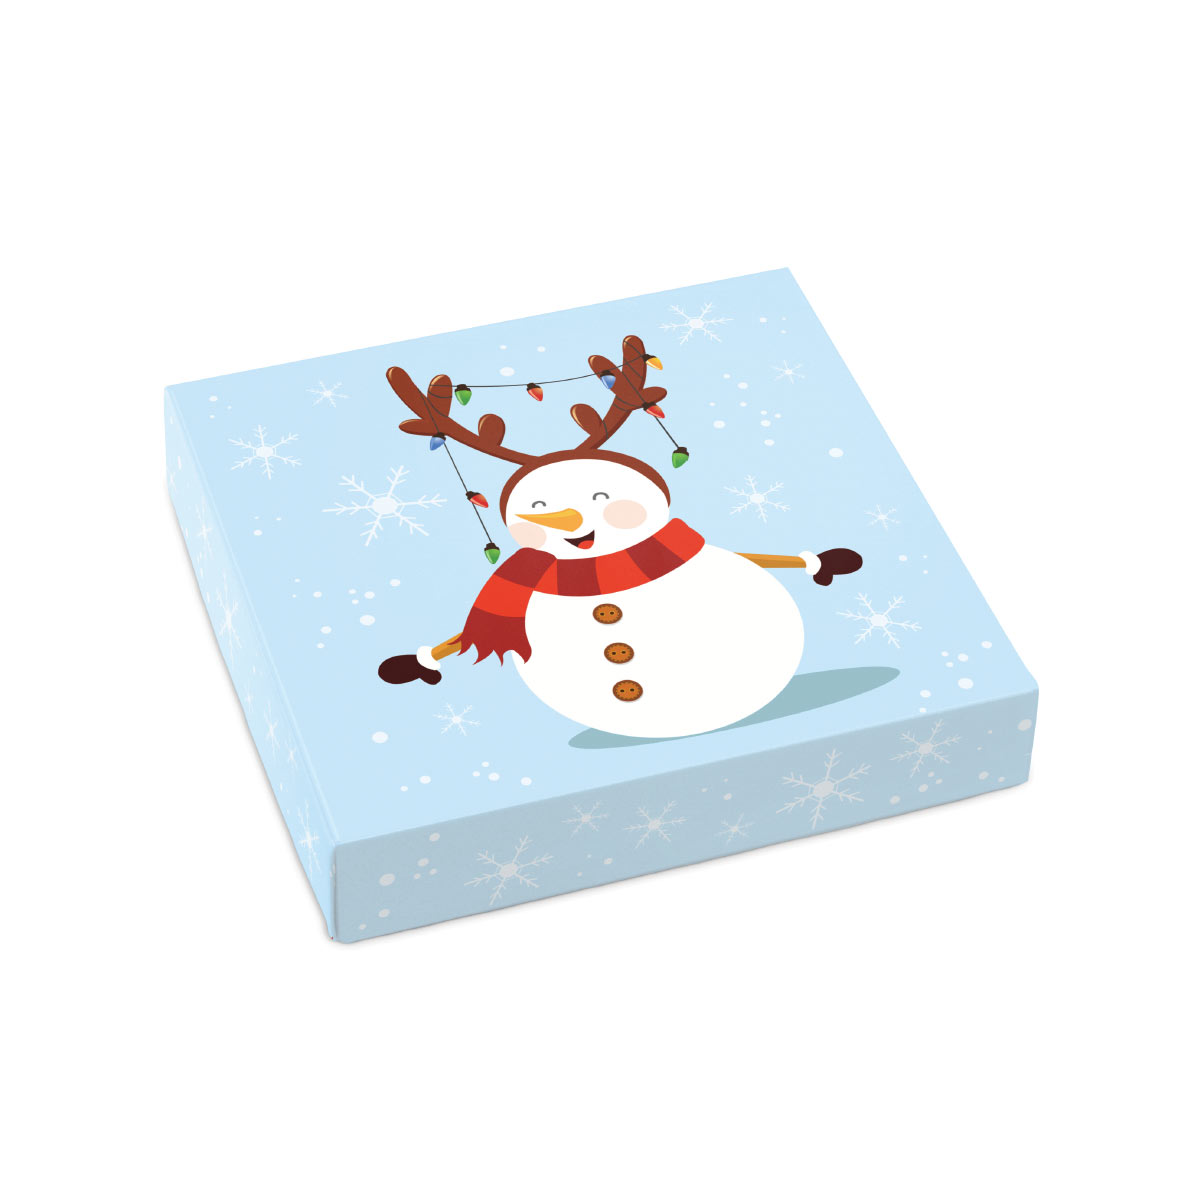 Cartoon Snowman Themed Box Cover for 16 Piece Holiday Assortment